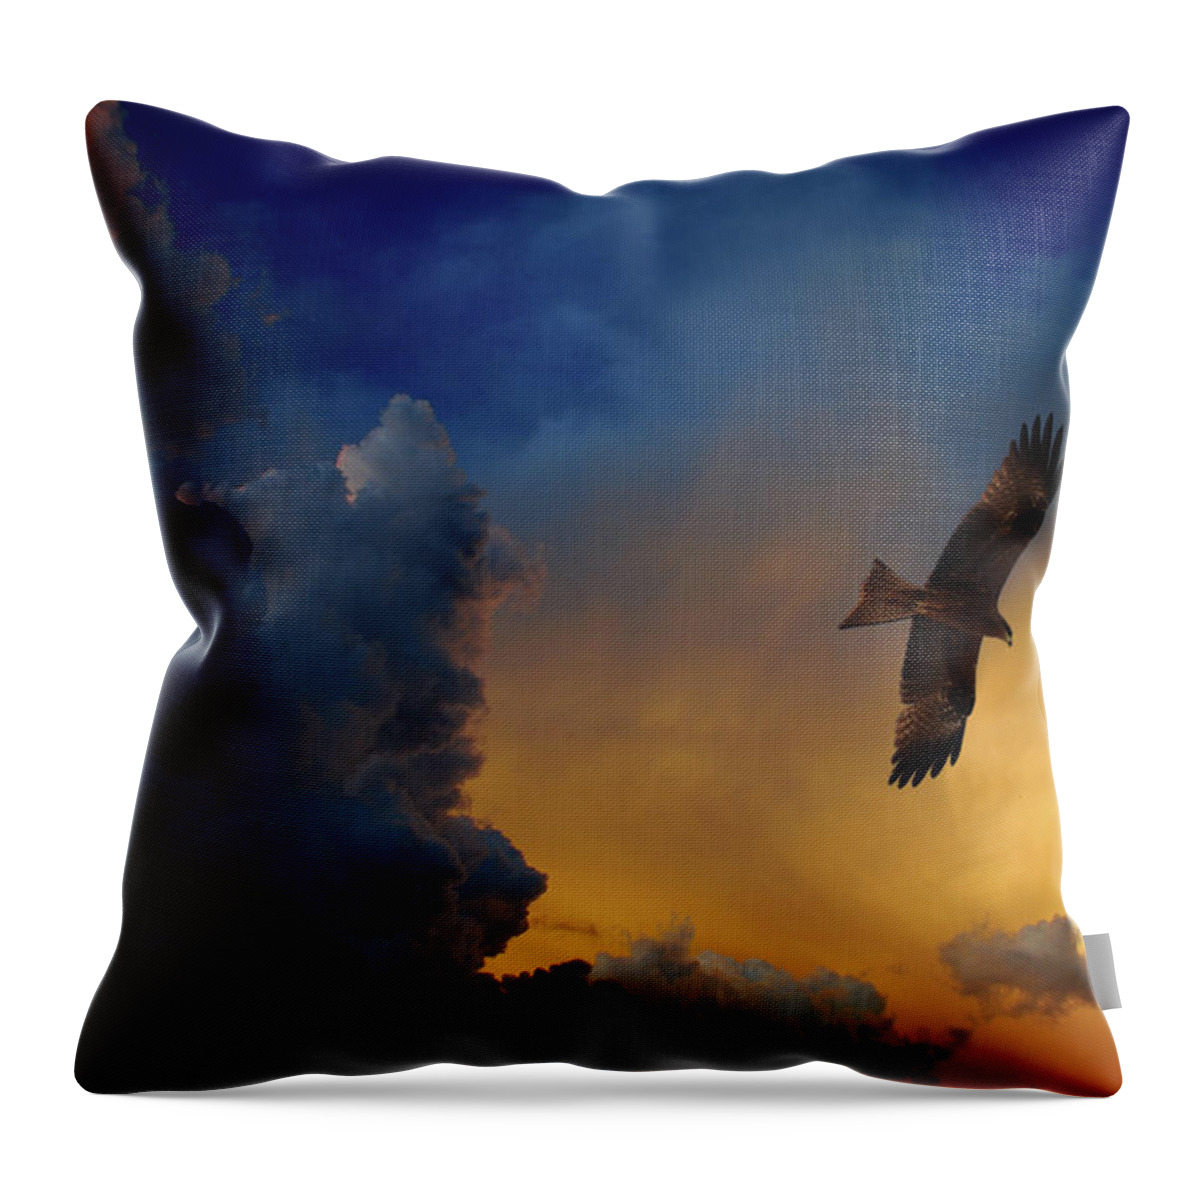 Animal Themes Throw Pillow featuring the photograph Eagle Over The Top by Gopan G Nair